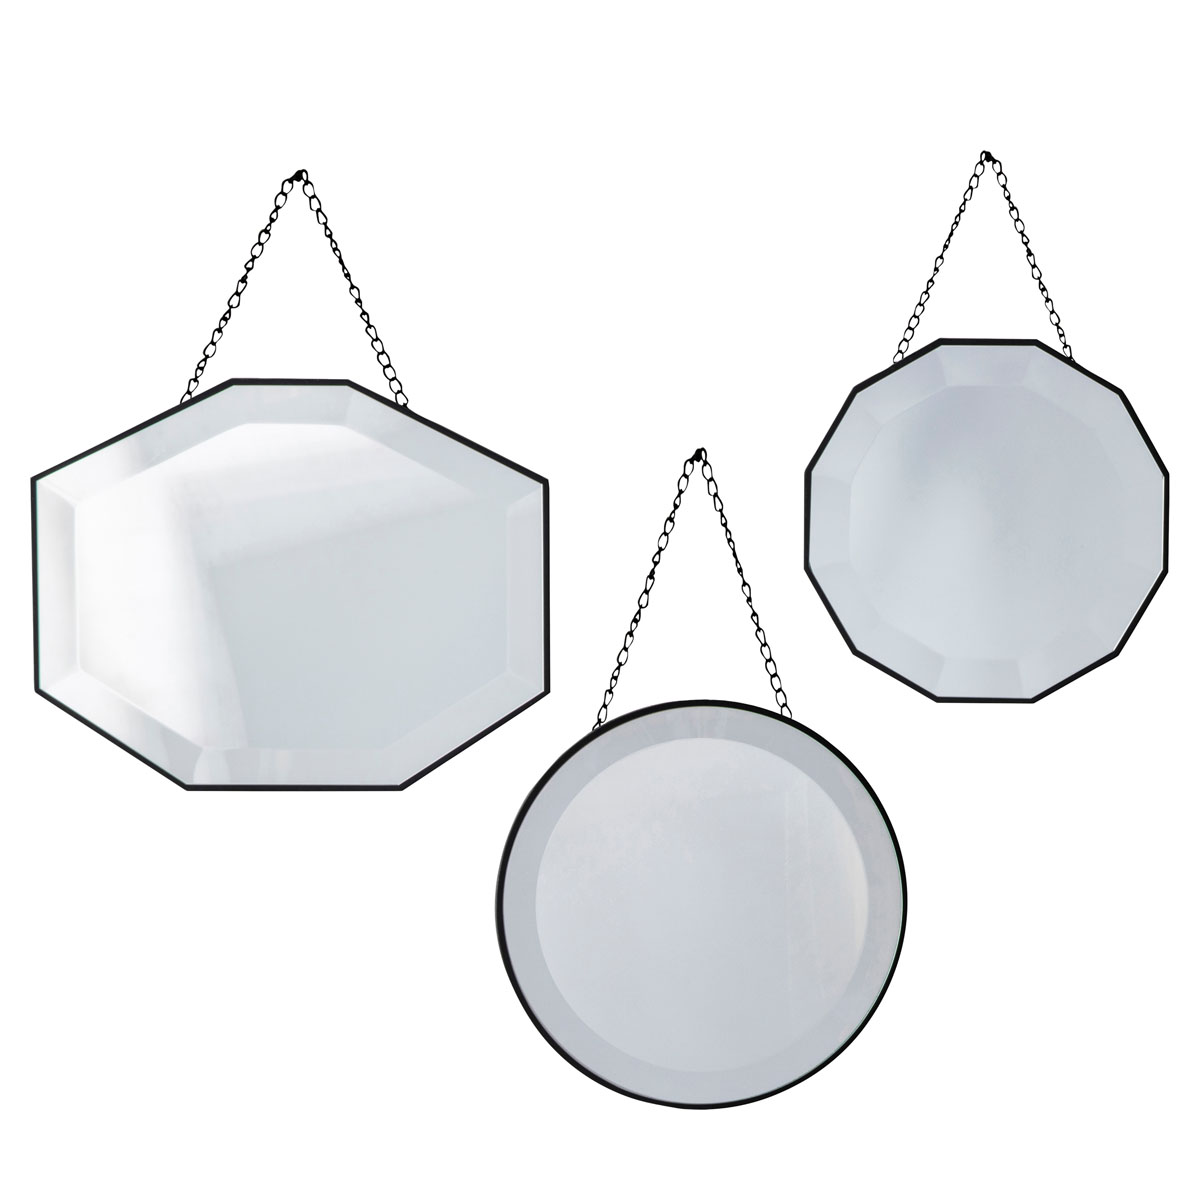 Haines Scatter Mirrors (Set of 3)